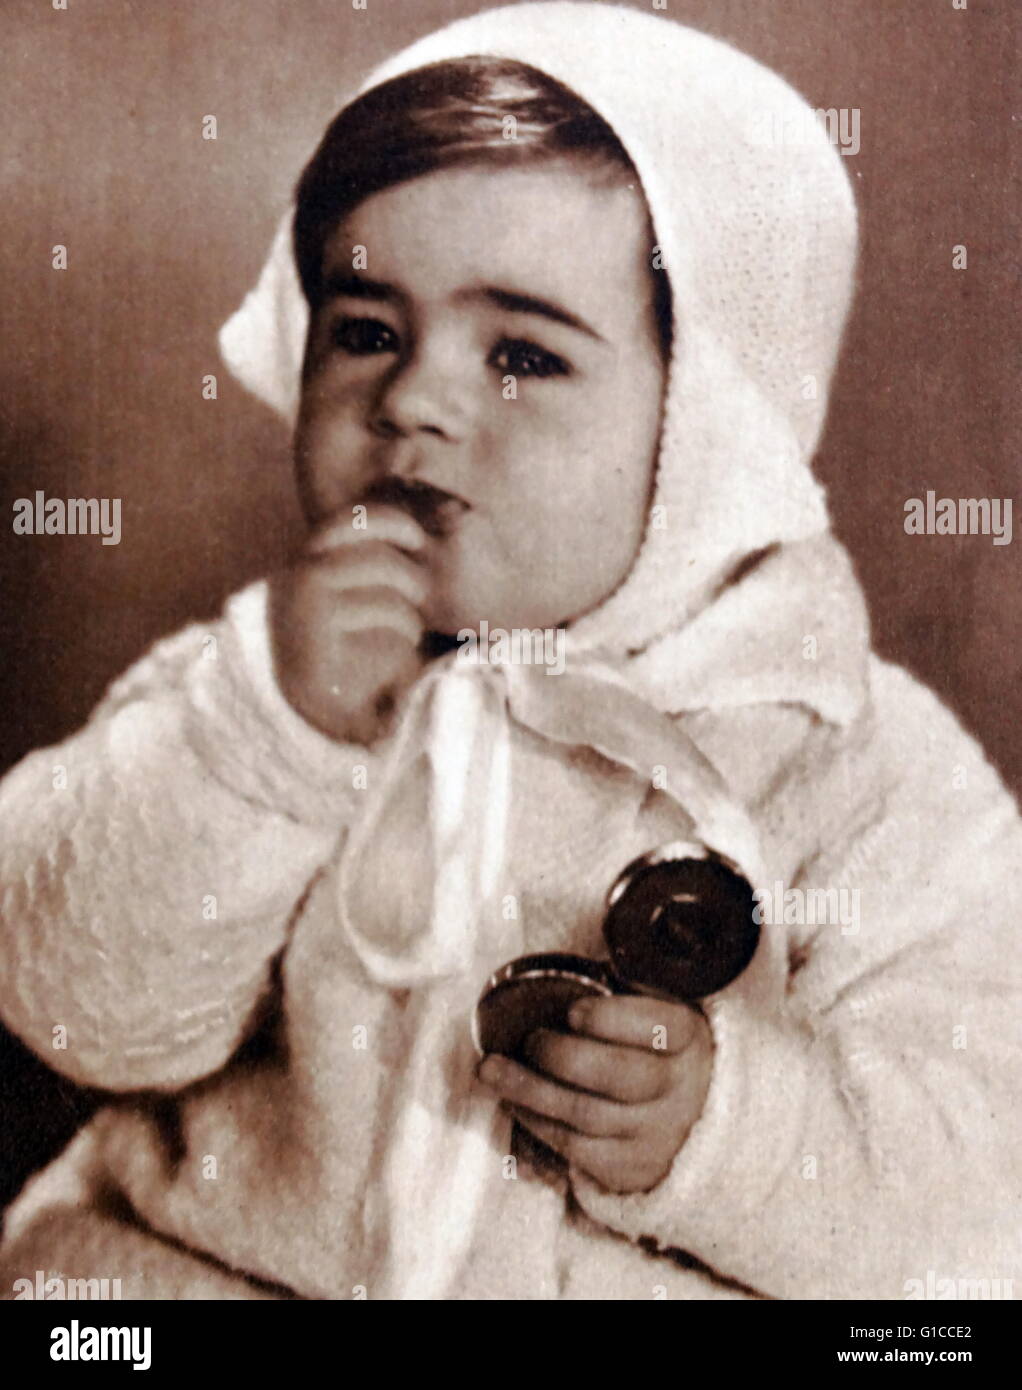 Vintage photograph of an infant in England 1930 Stock Photo